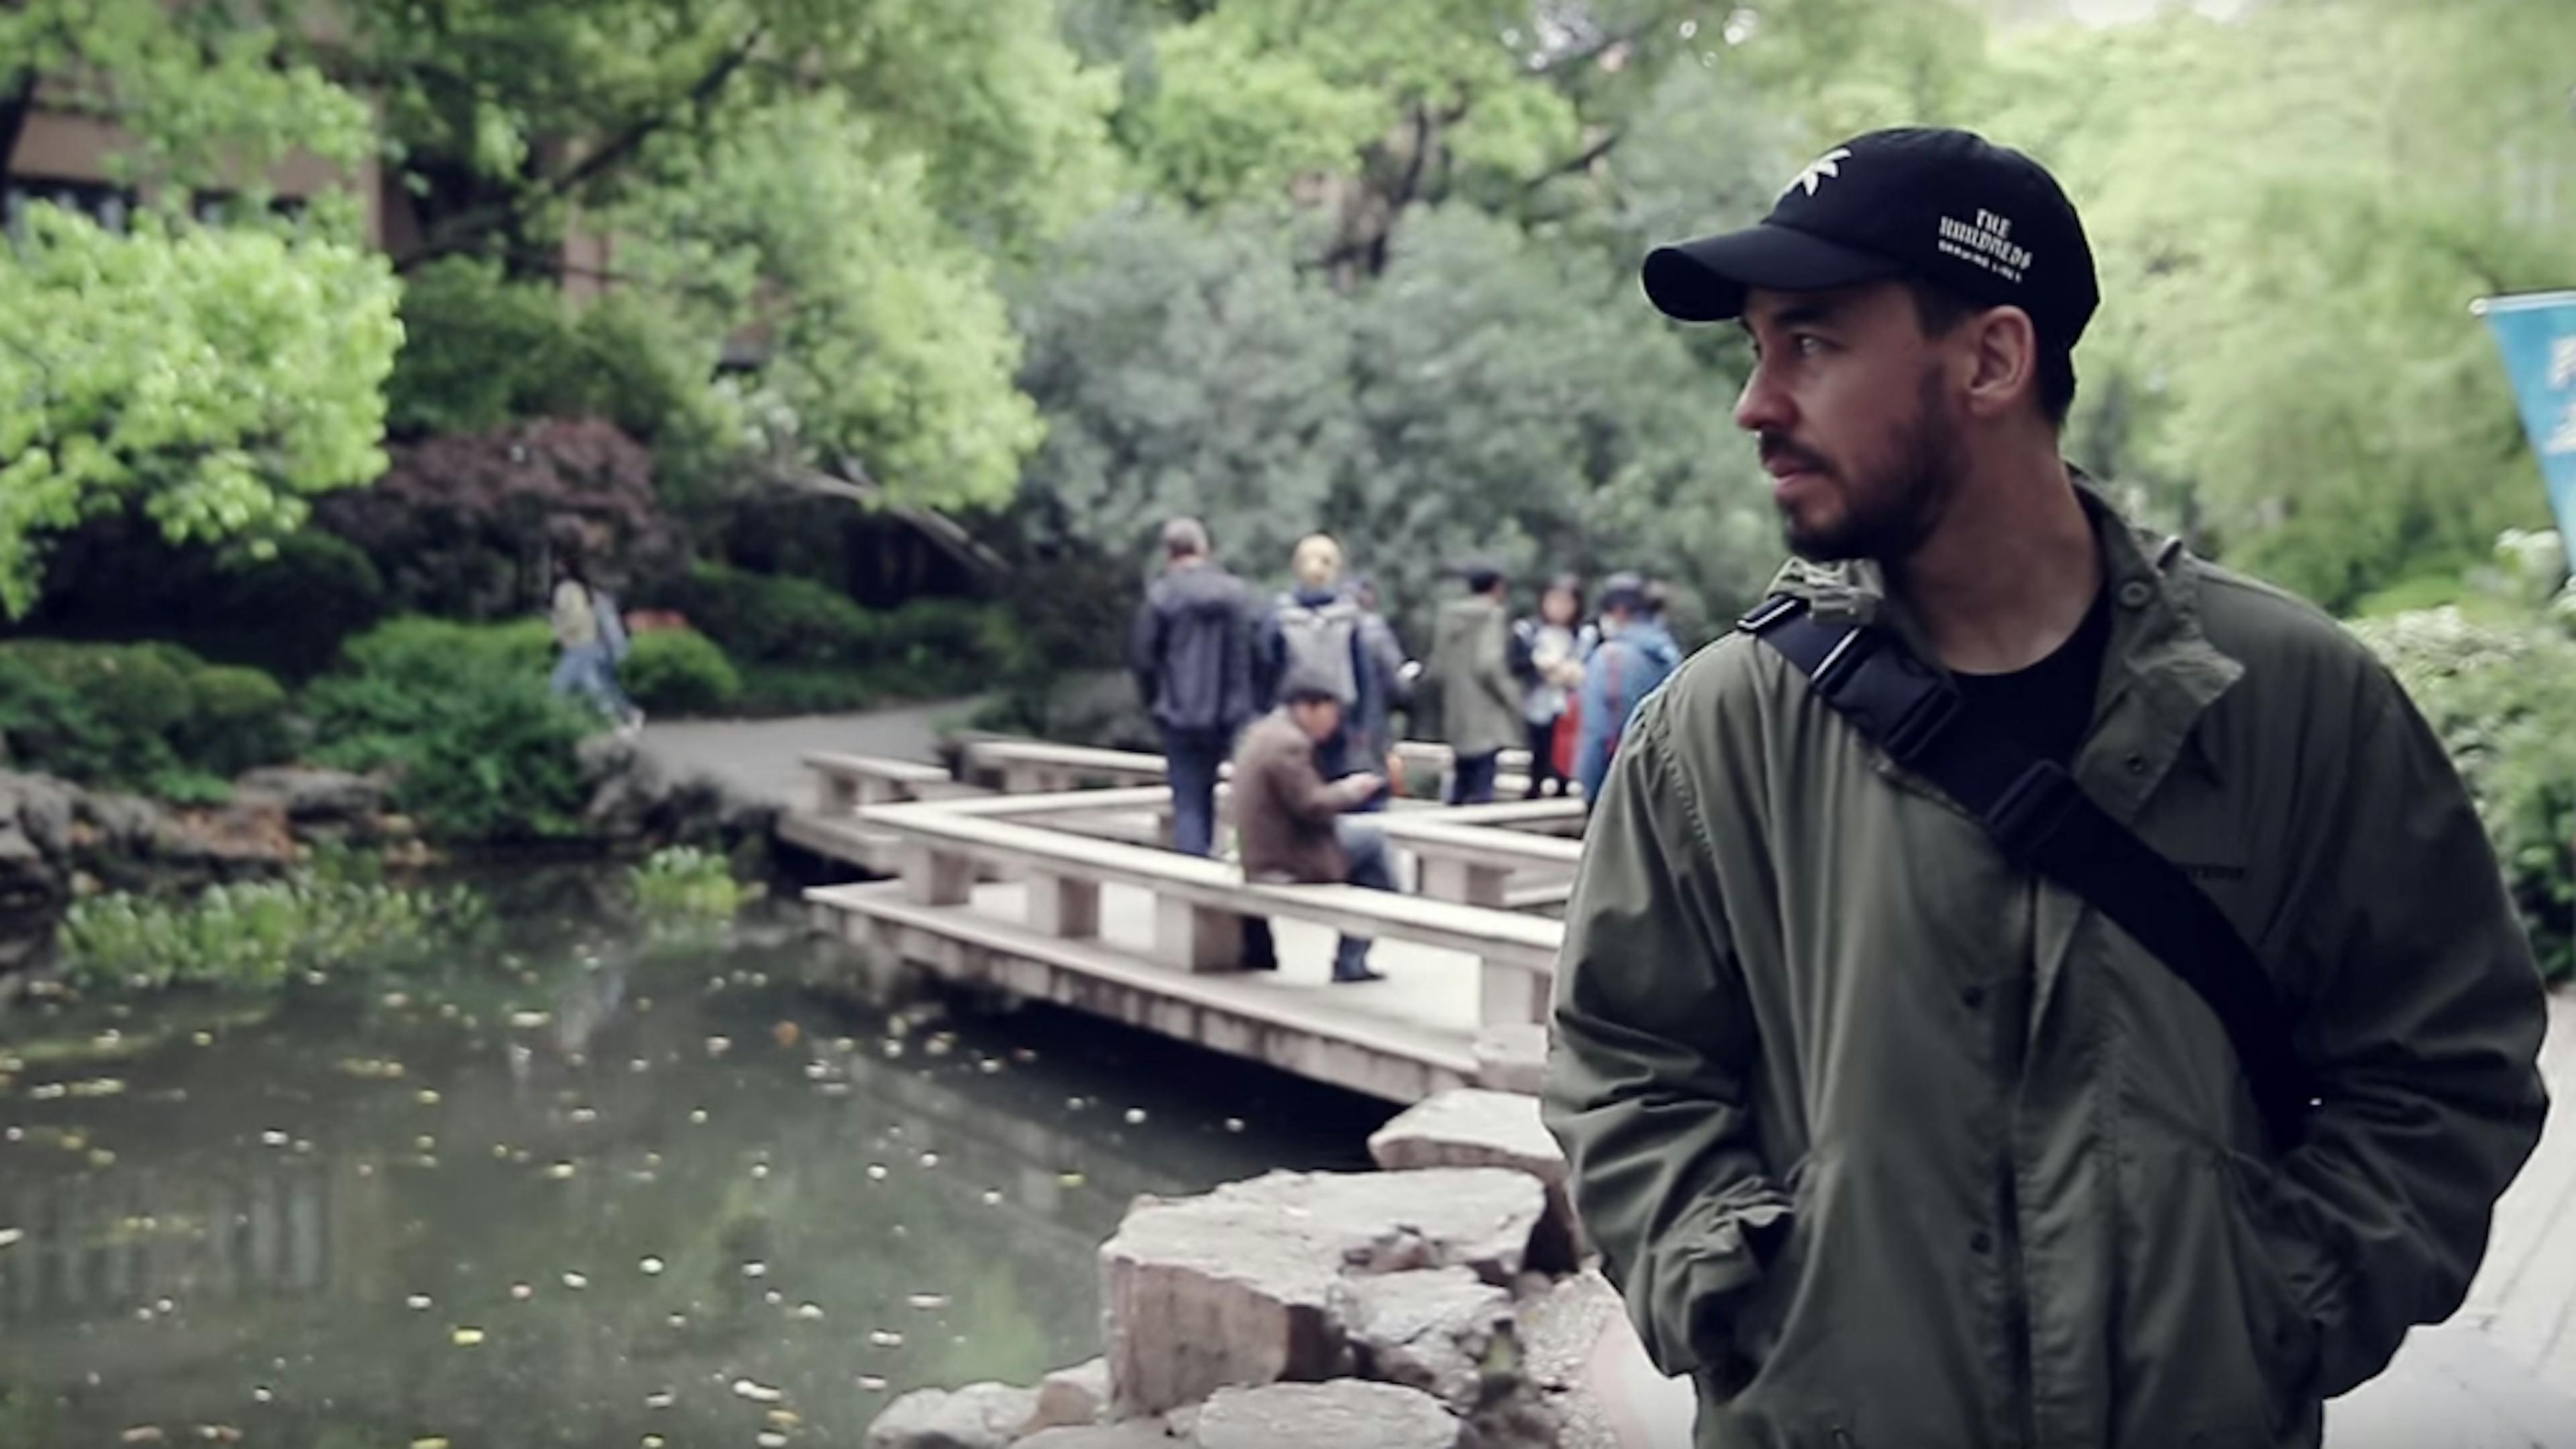 Watch Mike Shinoda's new video for About You (feat. blackbear)